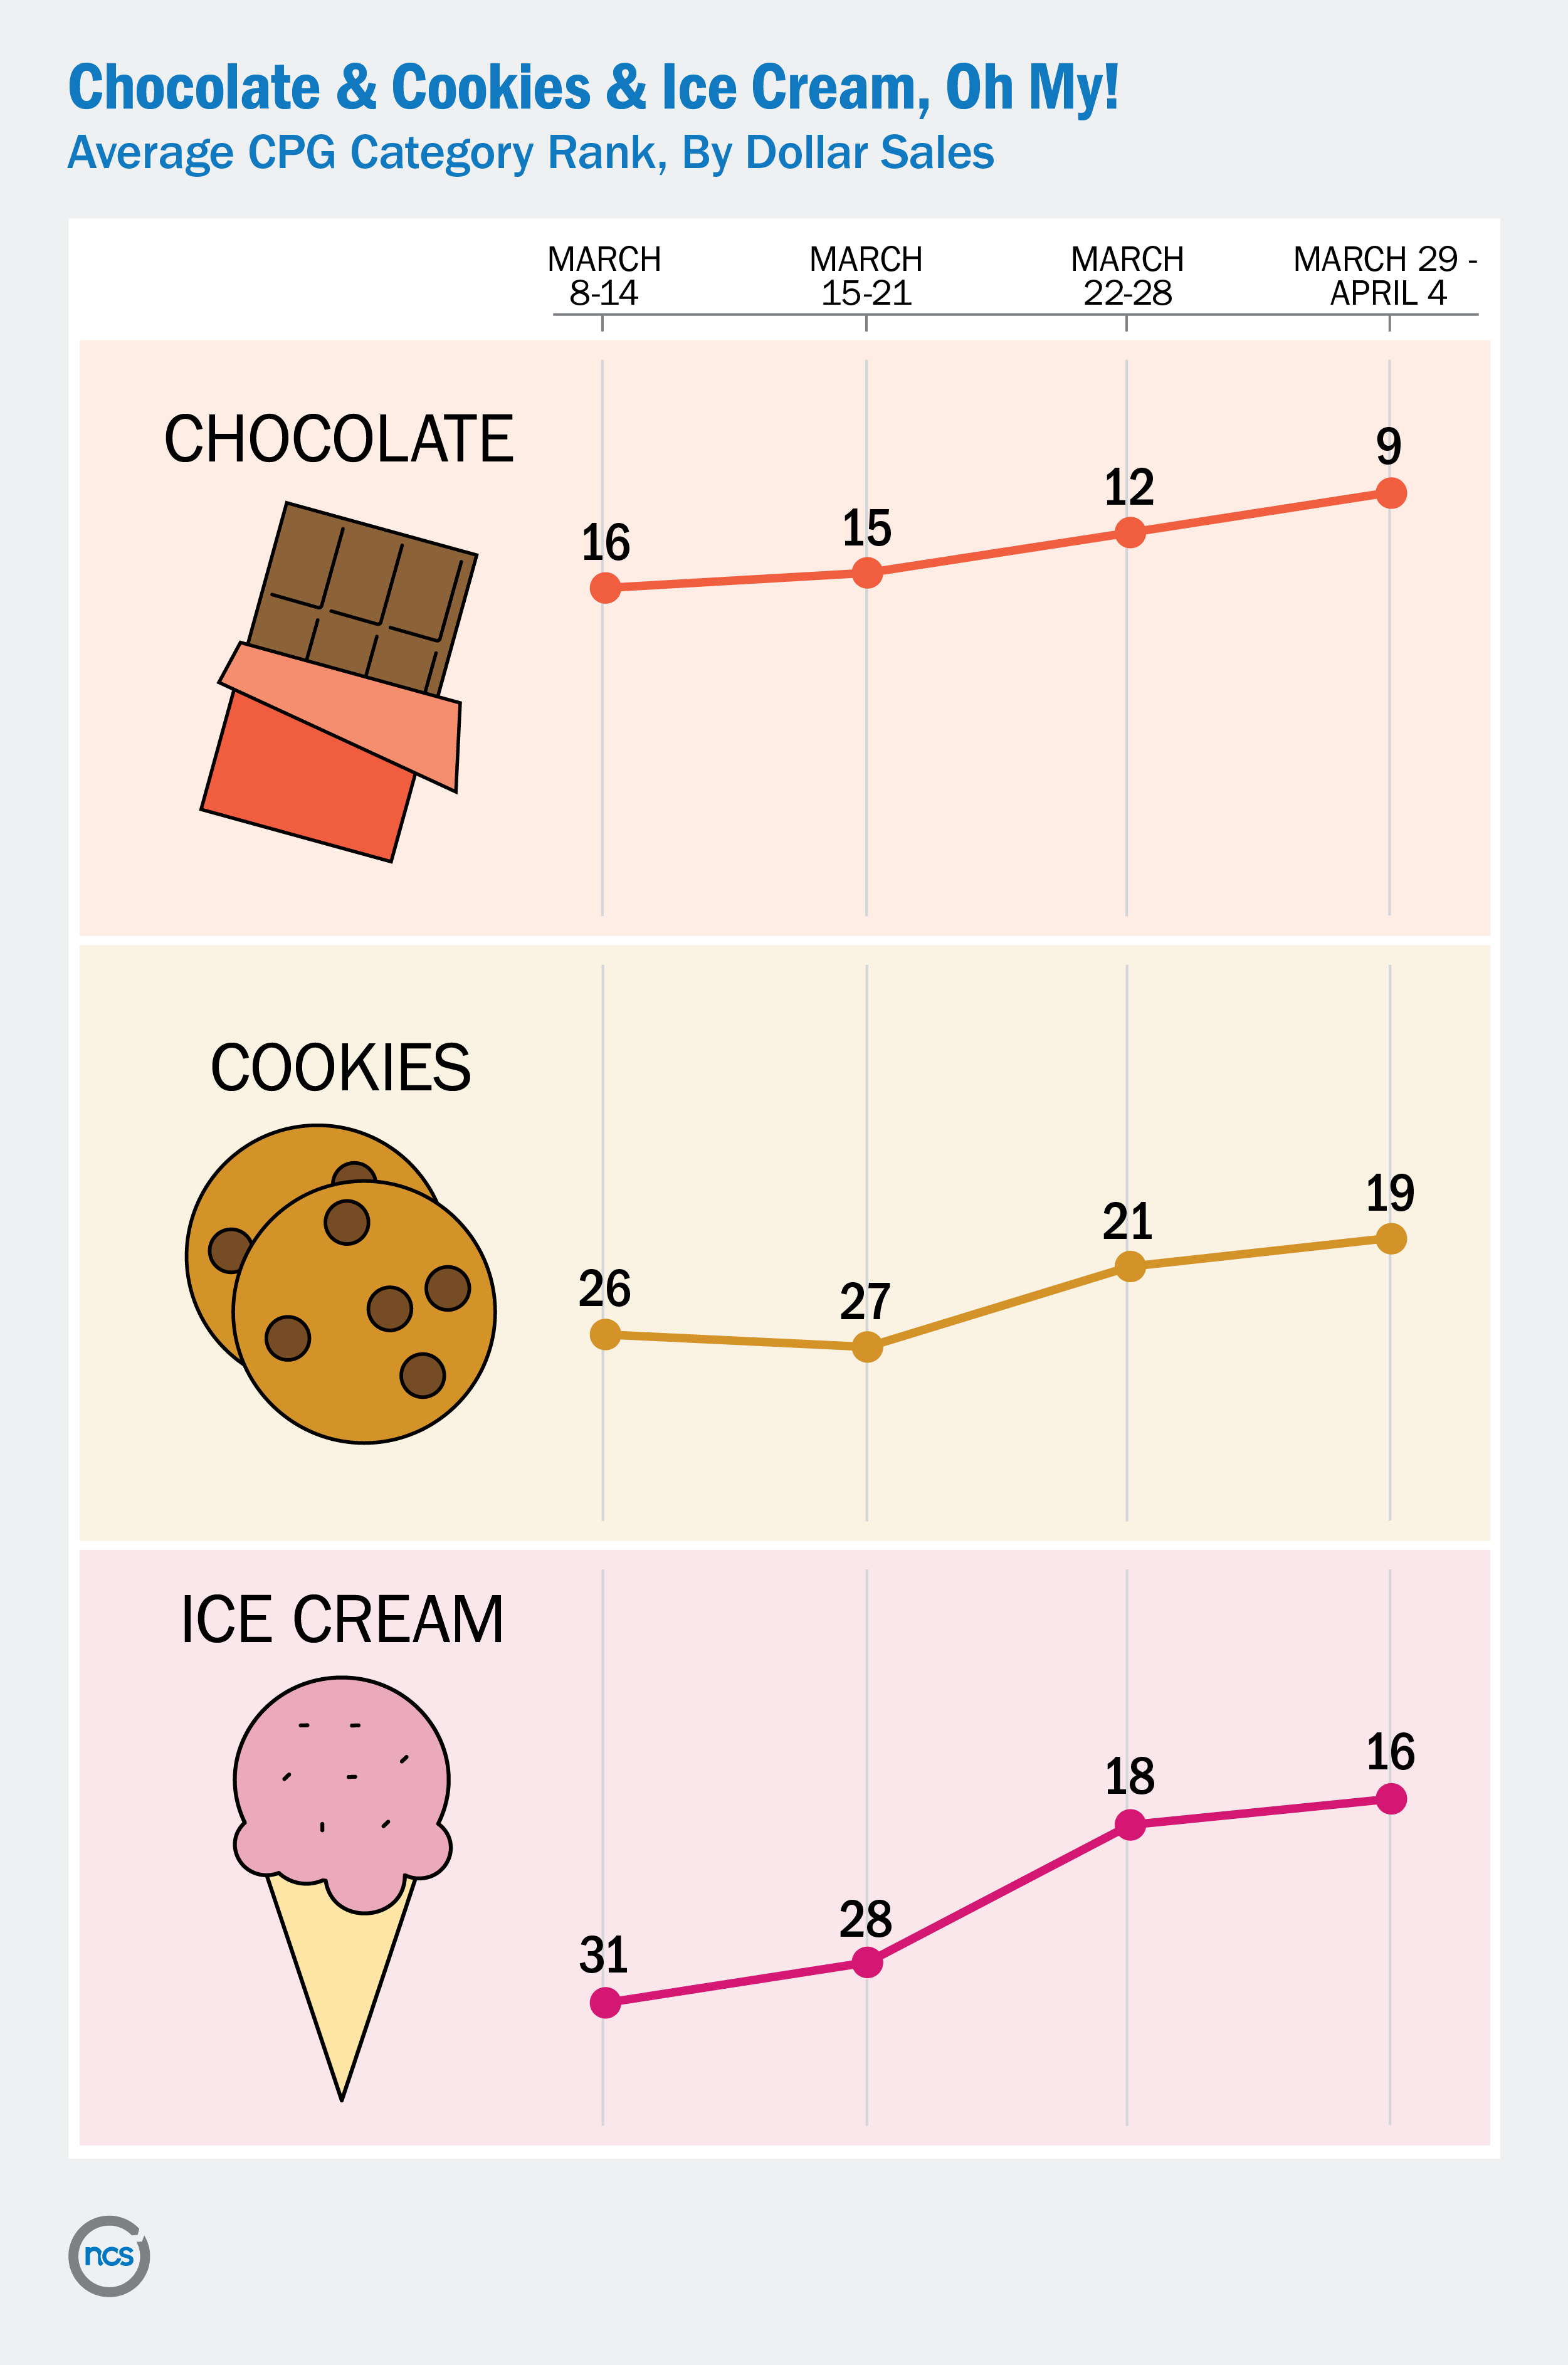 The chocolate, cookies and ice cream categories increase in their average CPG category rank (based on dollar sales) during the week of March 29-April 4, 2020.